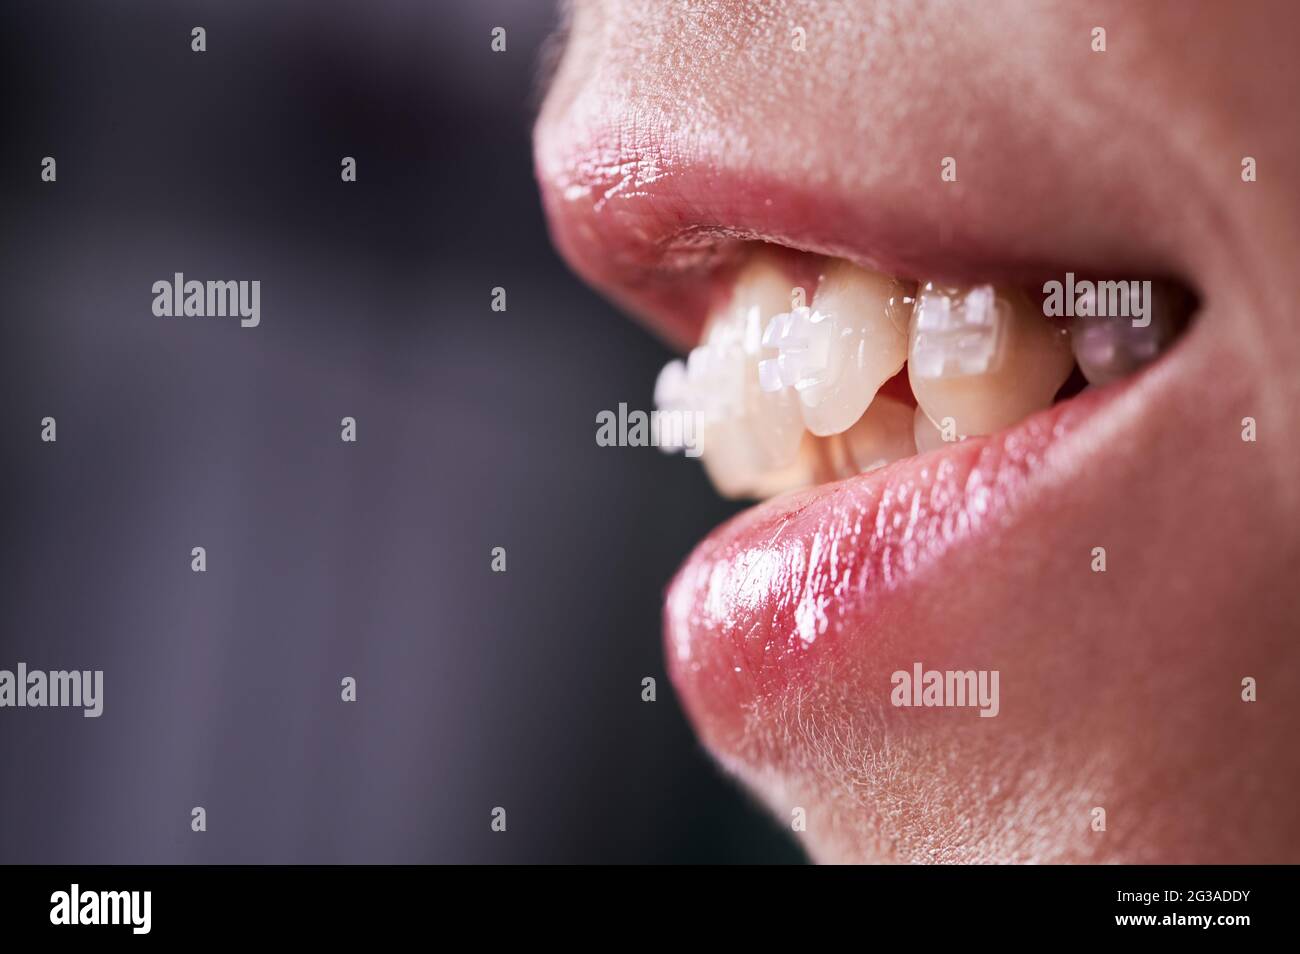 Close up of smiling woman with opened mouth demonstrating white teeth with orthodontic brackets. Female patient at dental braces treatment. Concept of orthodontic treatment and stomatology. Stock Photo